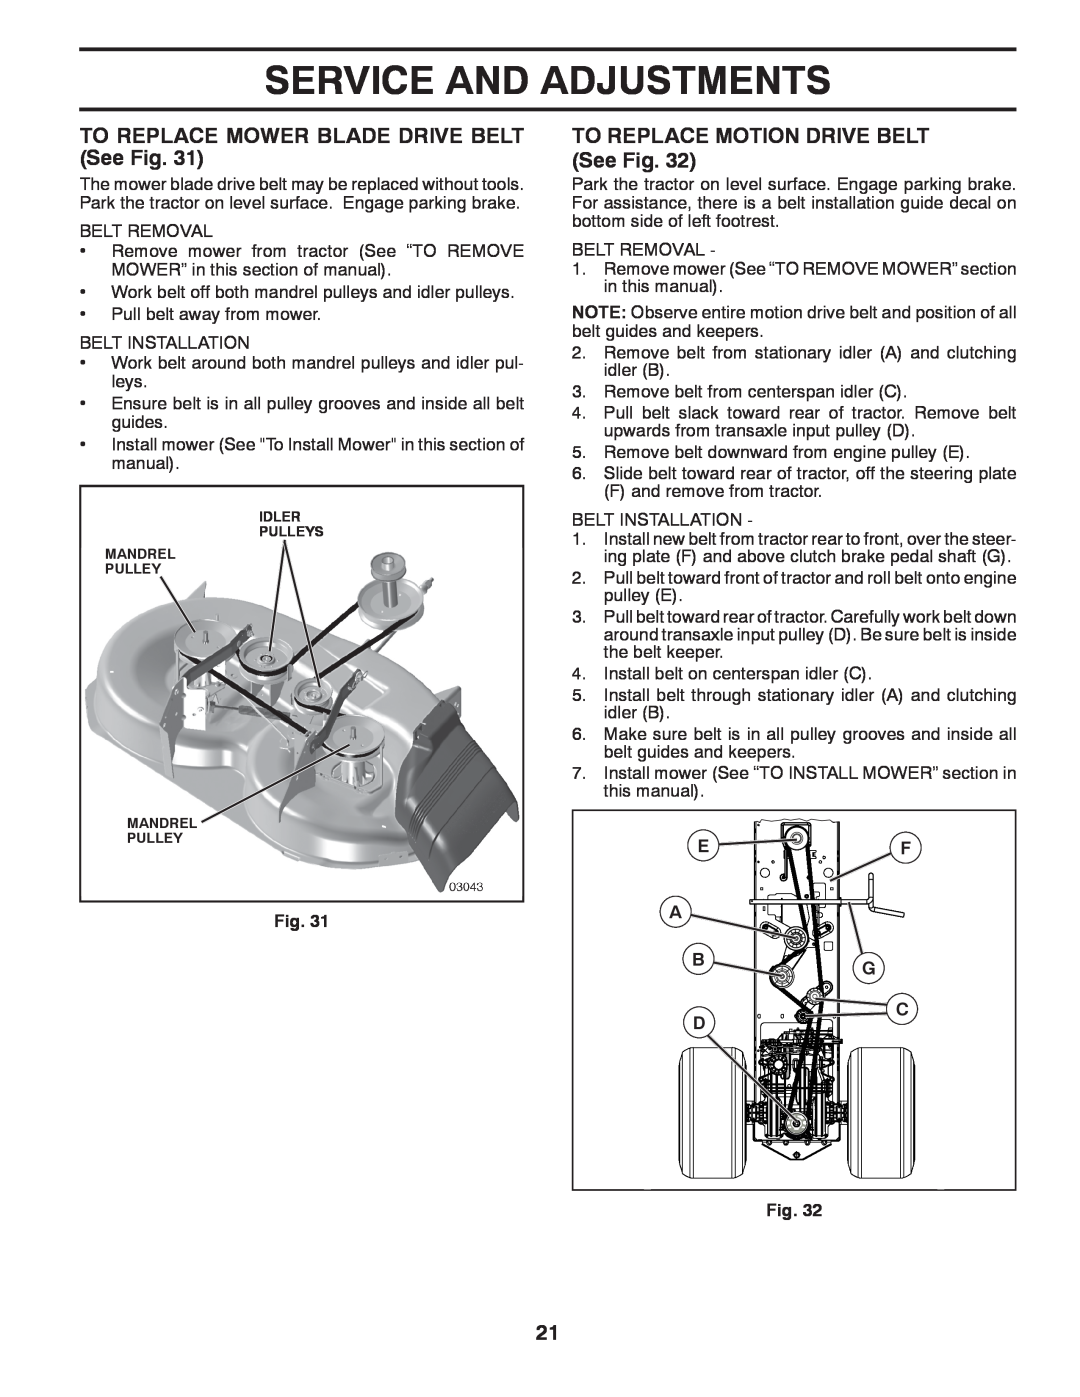 Ariens 935335 42 Service And Adjustments, TO REPLACE MOWER BLADE DRIVE BELT See Fig, TO REPLACE MOTION DRIVE BELT See Fig 